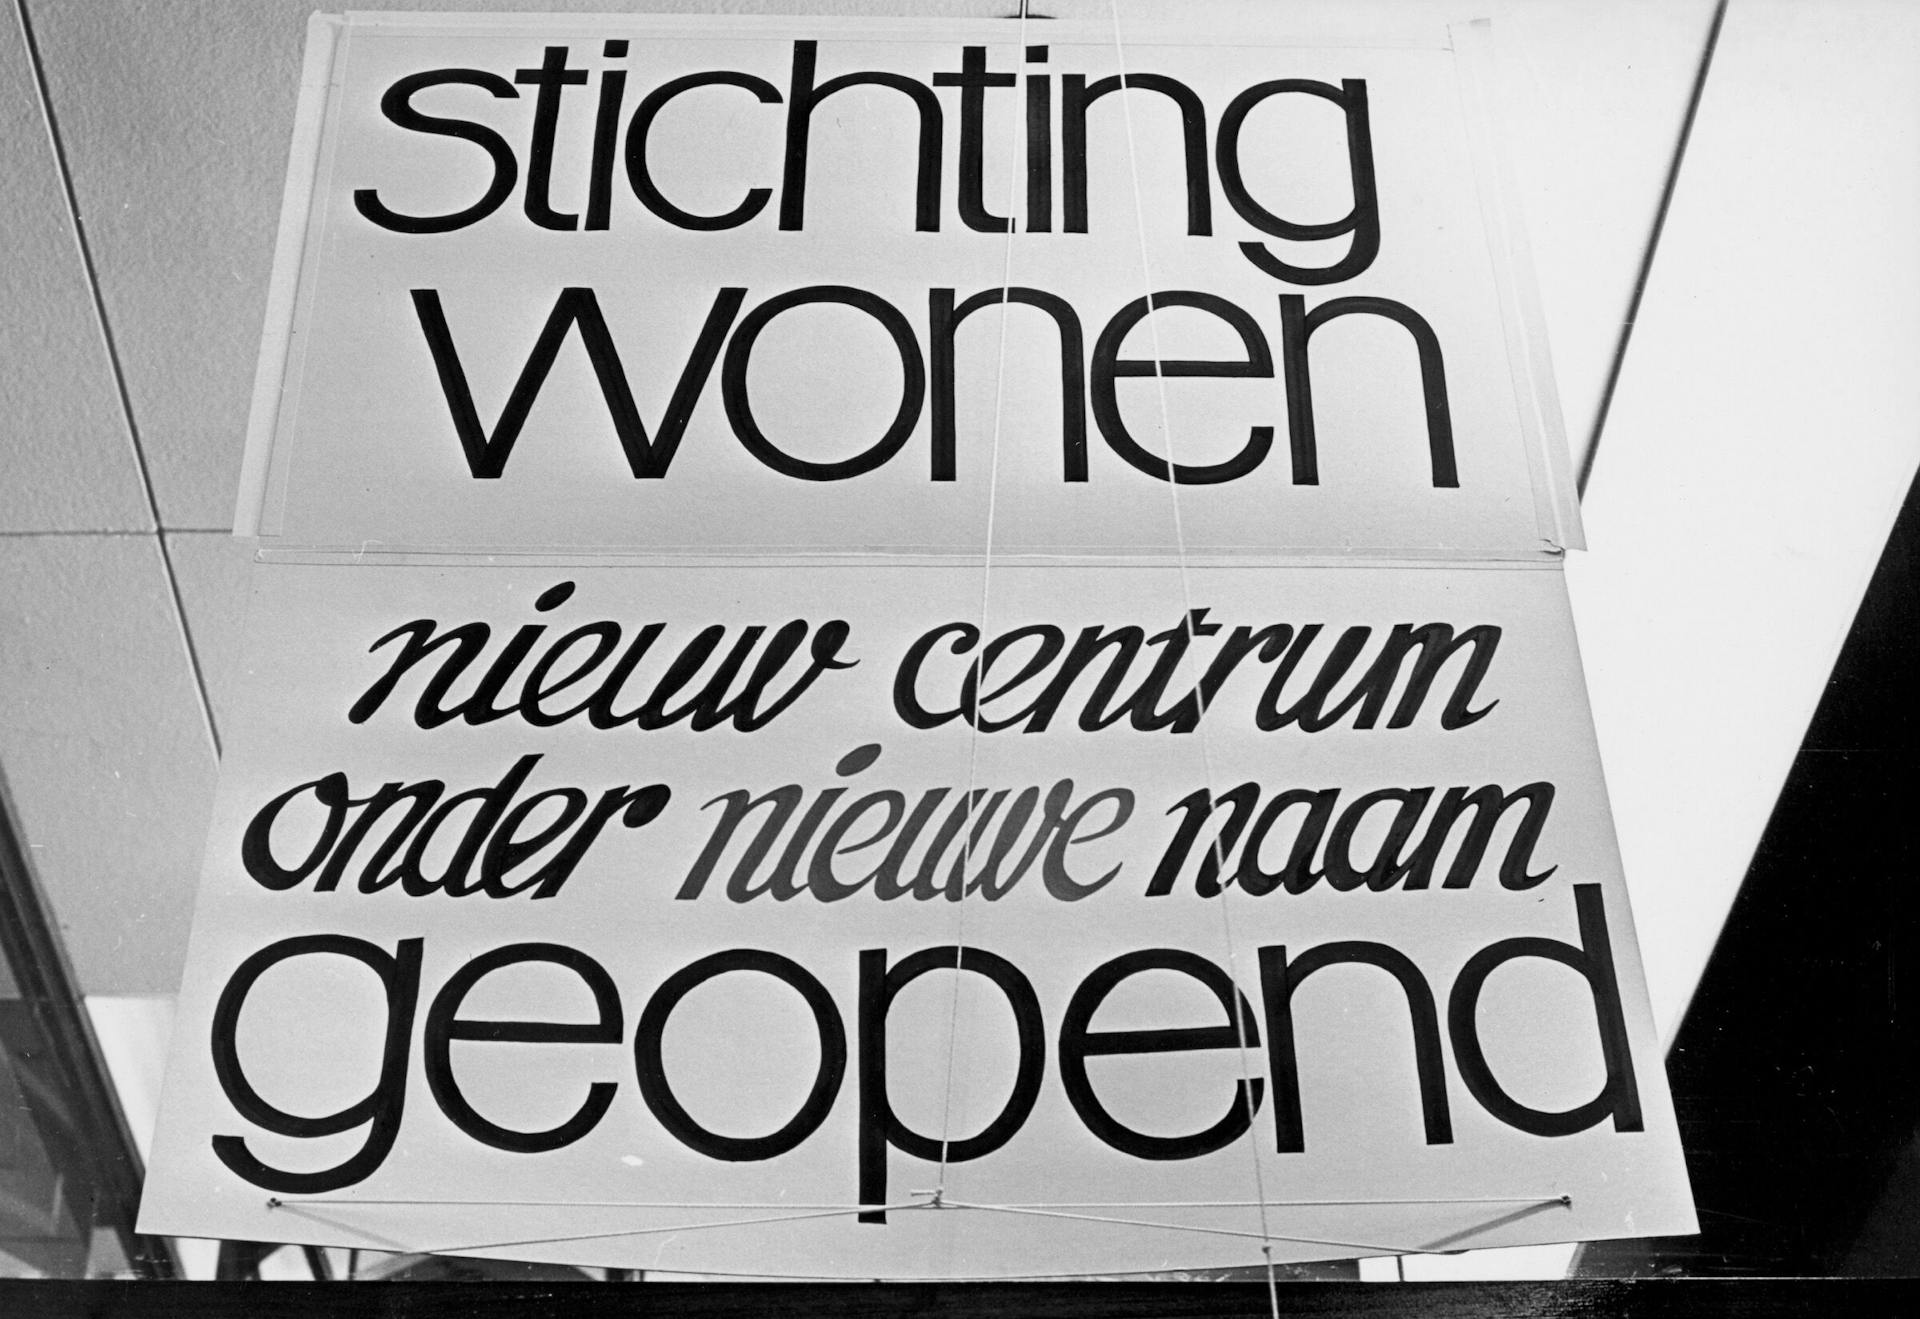 [Housing Foundation, New Centre Opened Under New Name], year: 196?, photo: unknown. Source: Archive Stichting Wonen, Collection Het Nieuwe Instituut  